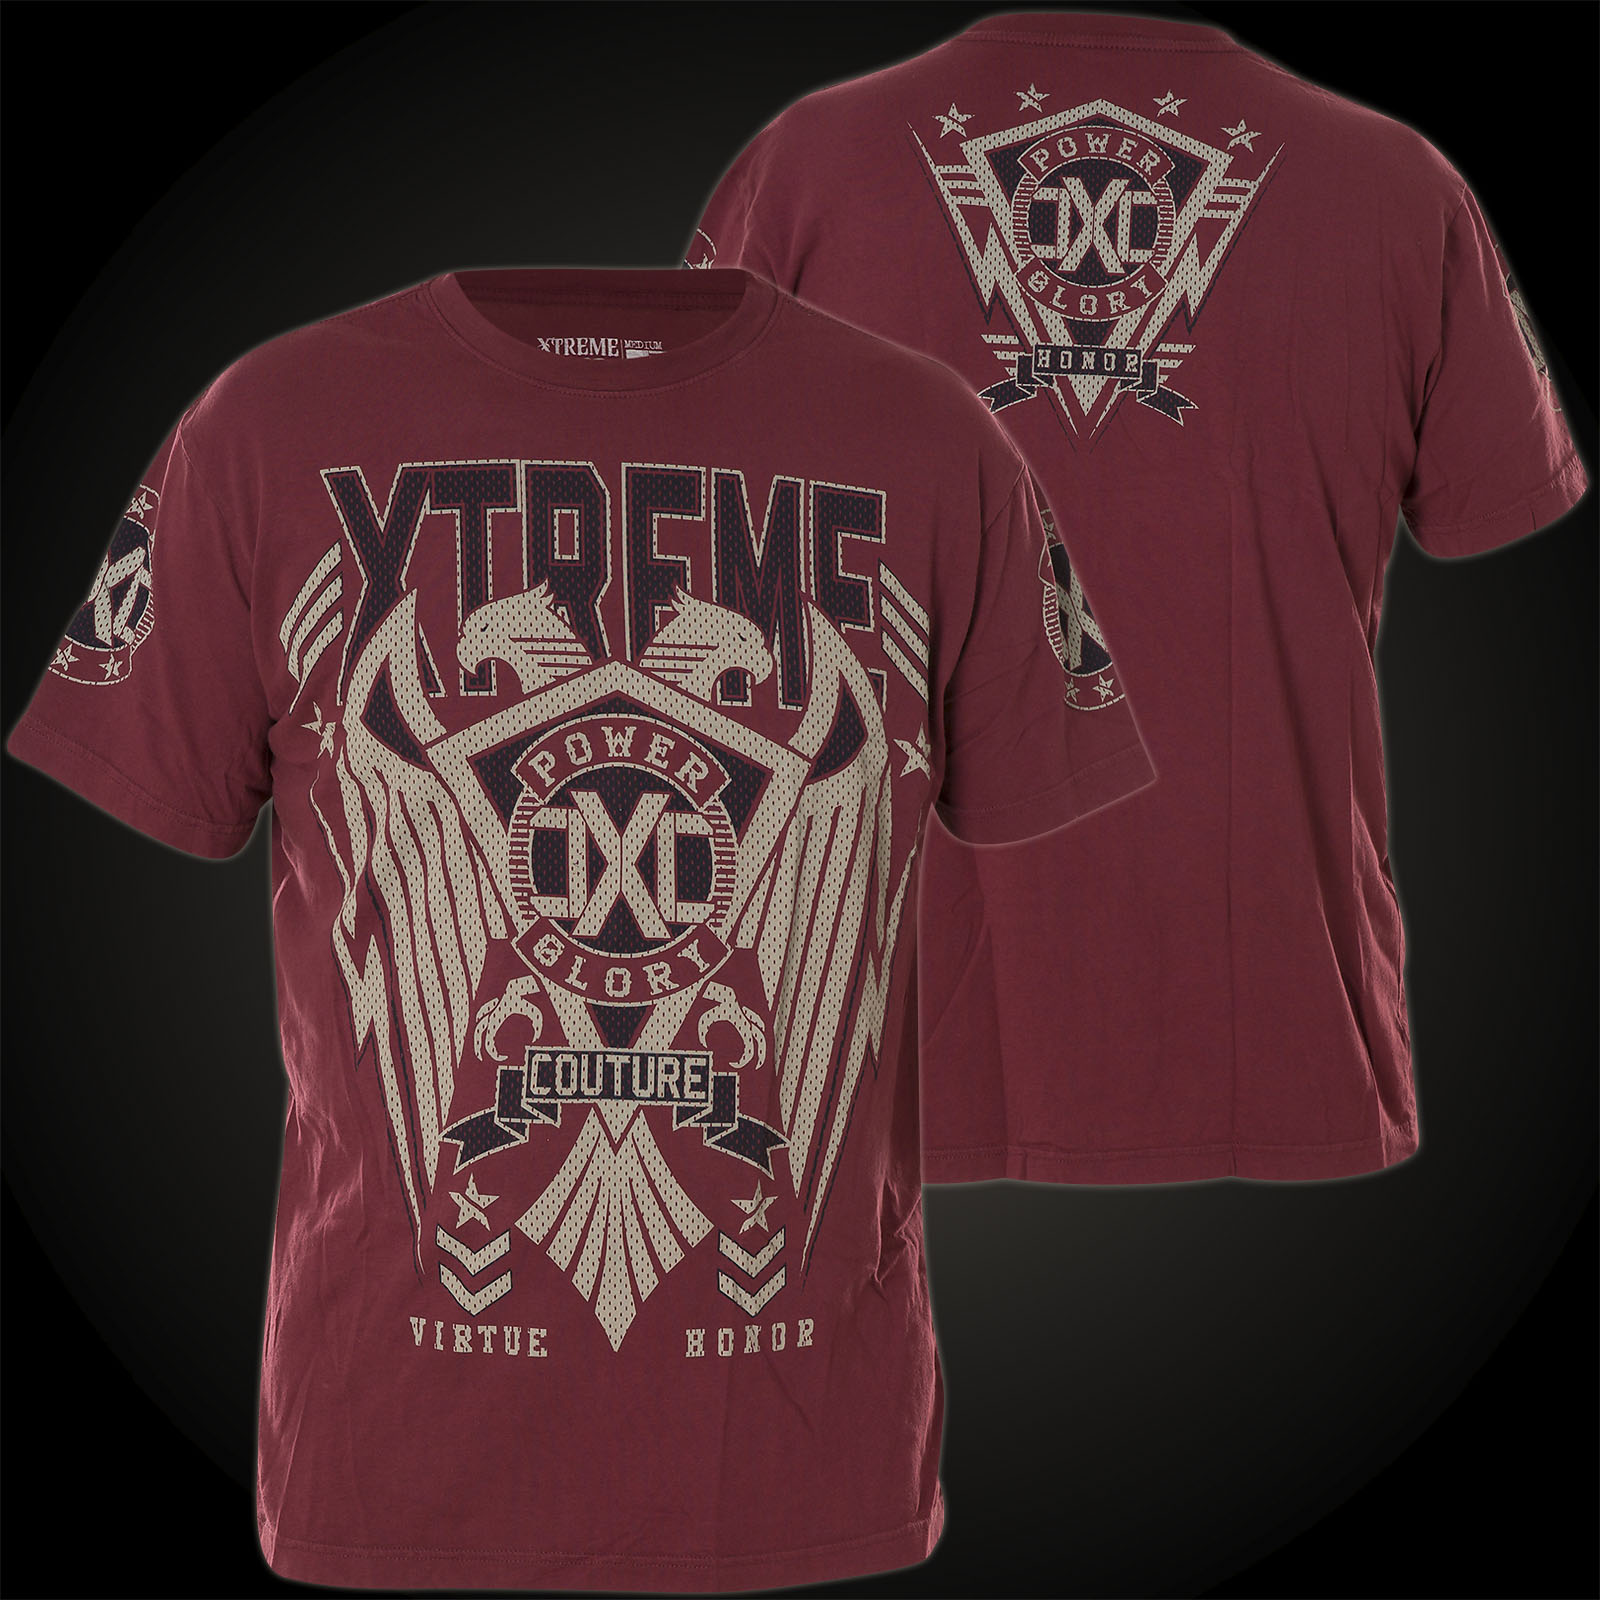 Xtreme Couture T- Shirt Chryses with a large bird of prey